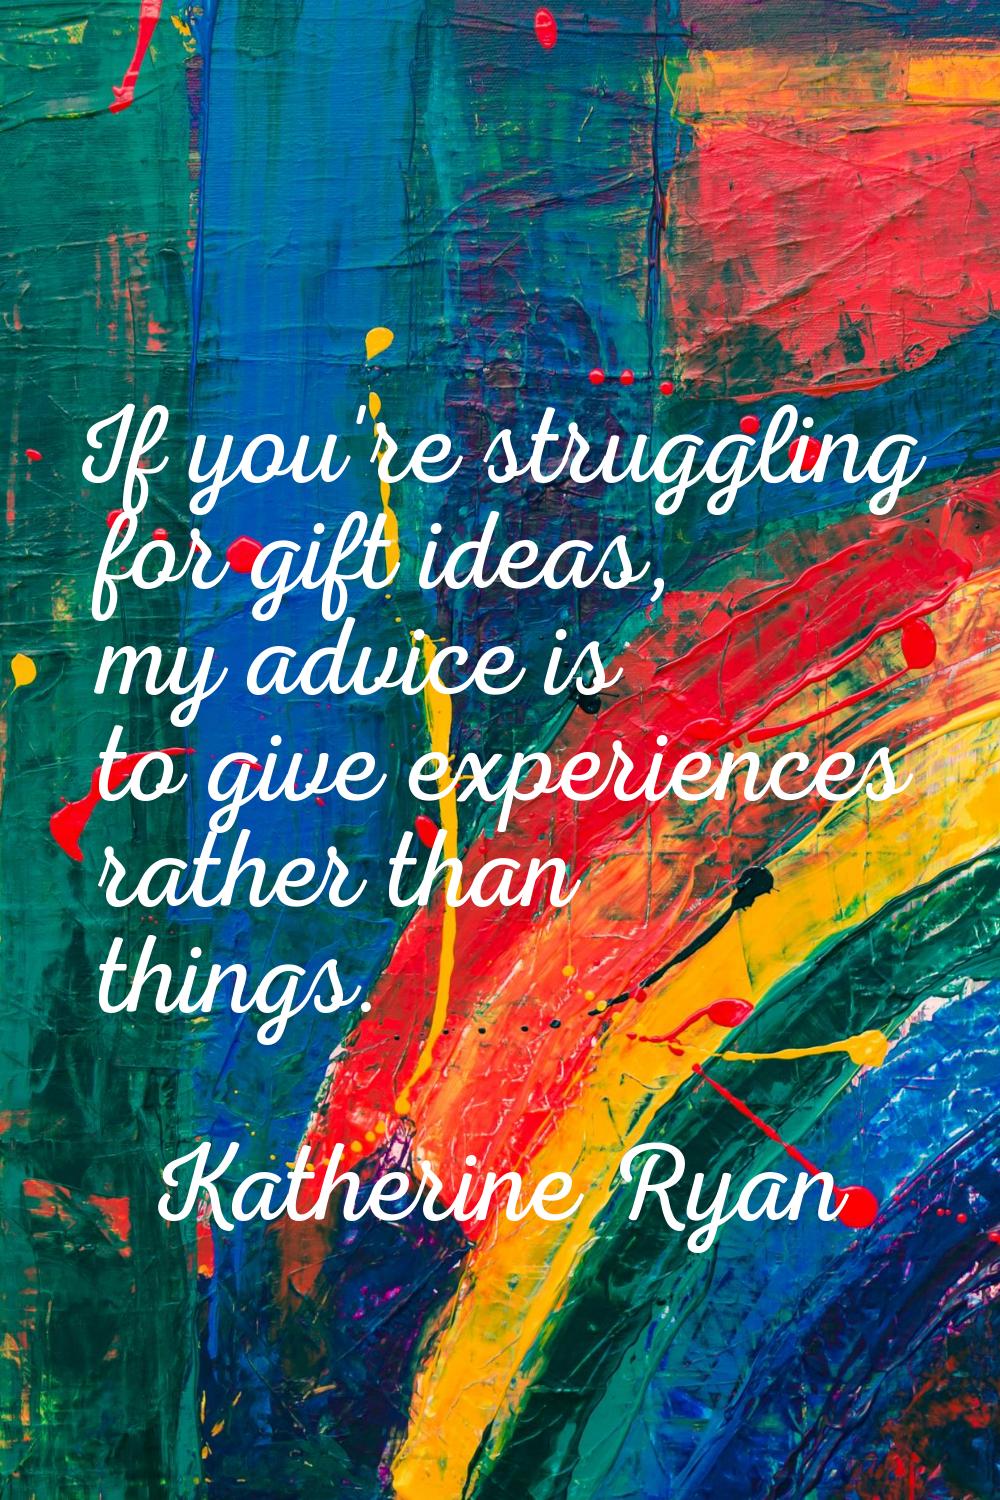 If you're struggling for gift ideas, my advice is to give experiences rather than things.